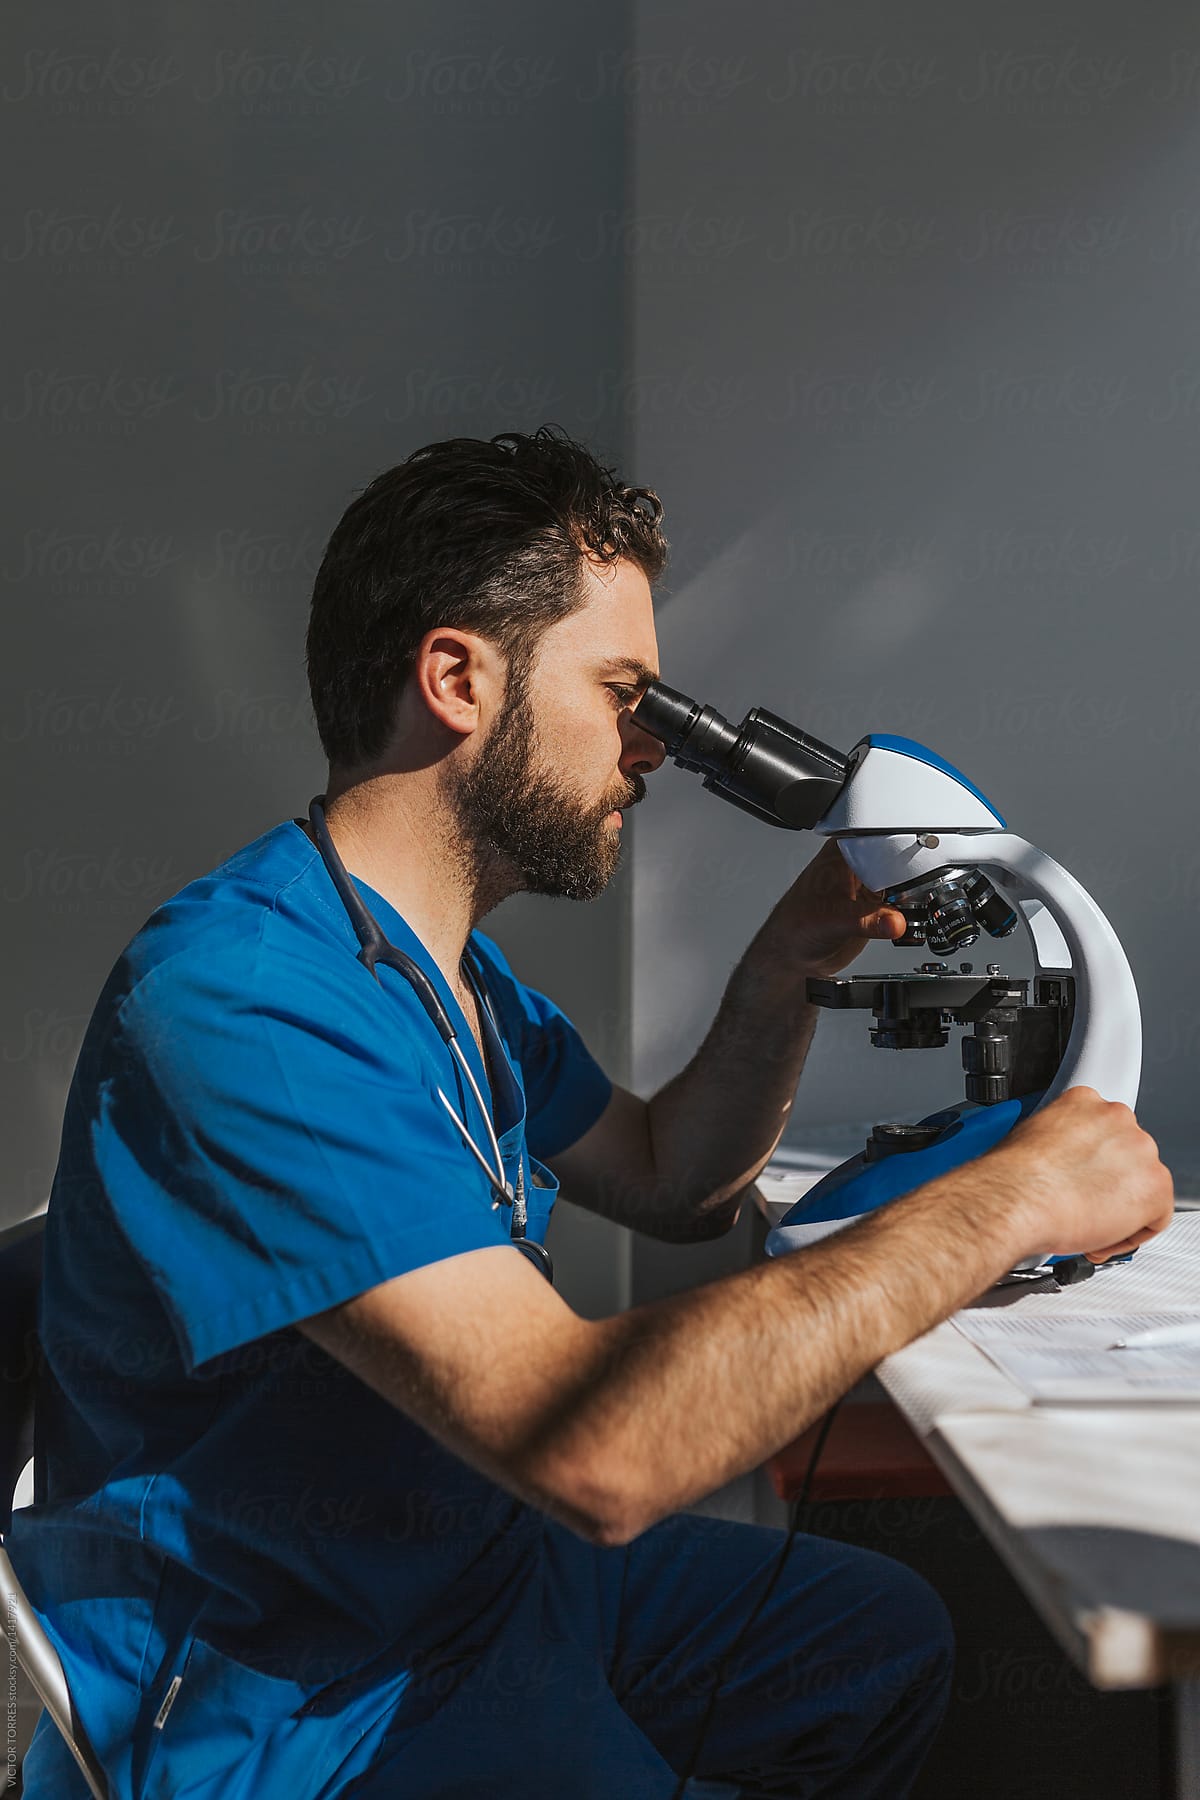 Veterinary working with a microscope and taking notes